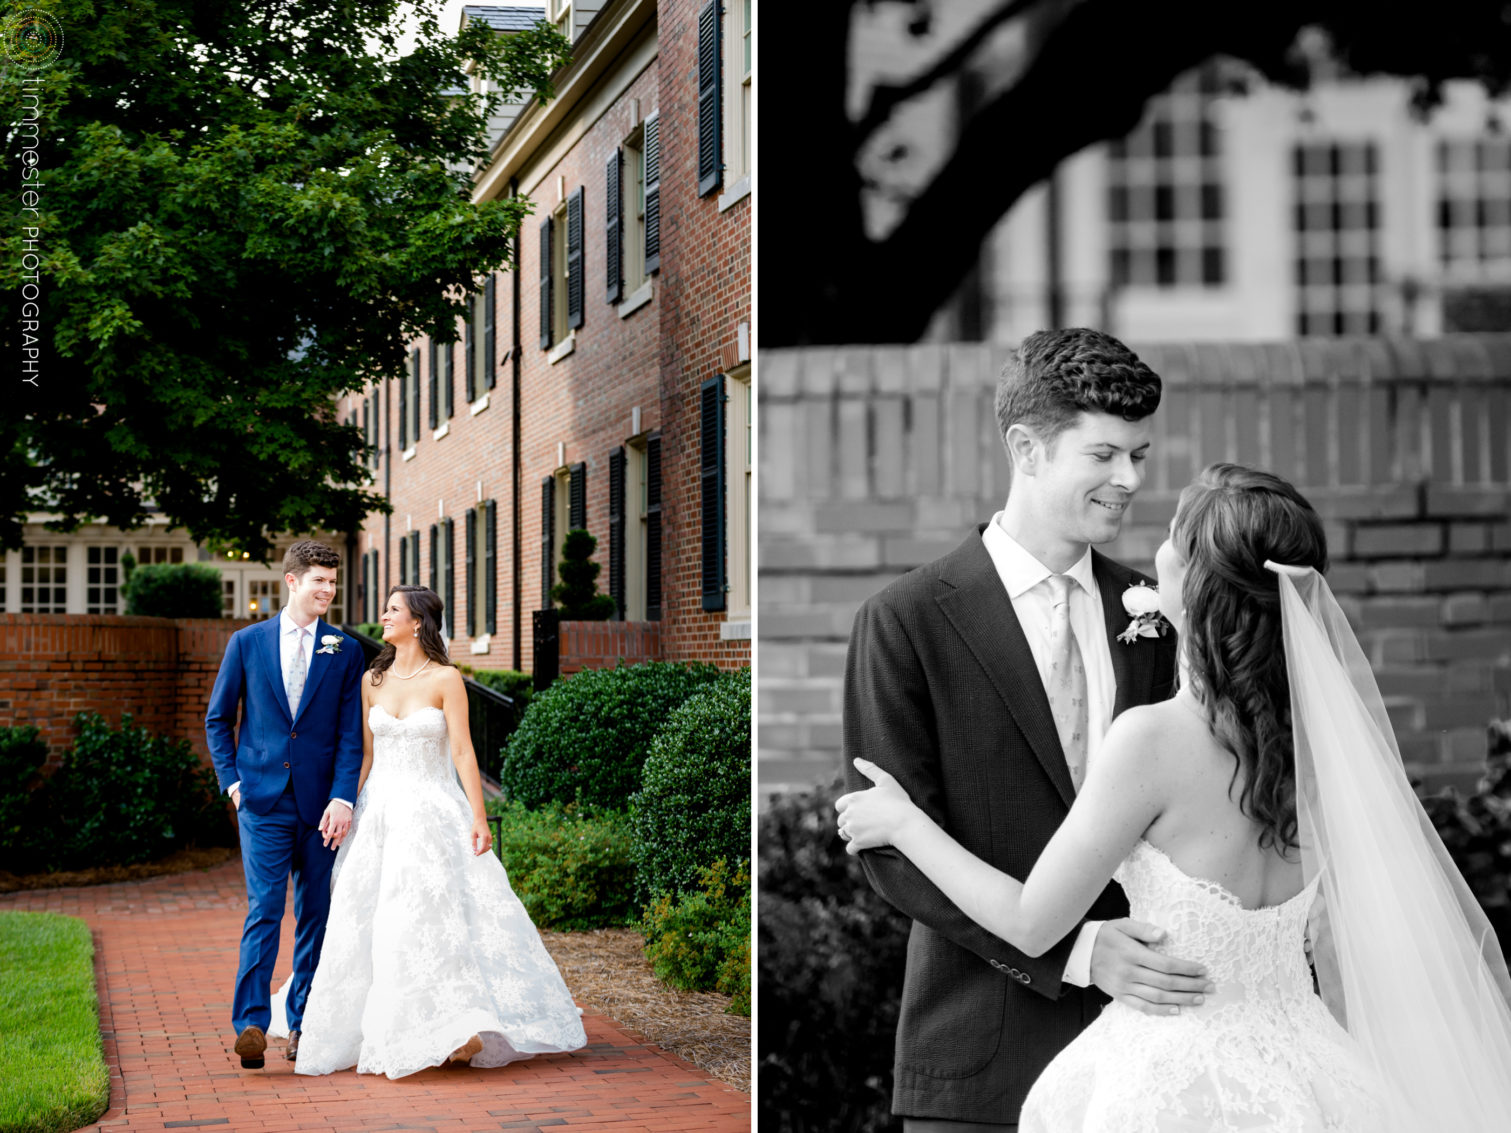 A wedding and bride and groom portraits at The Carolina Inn in NC.